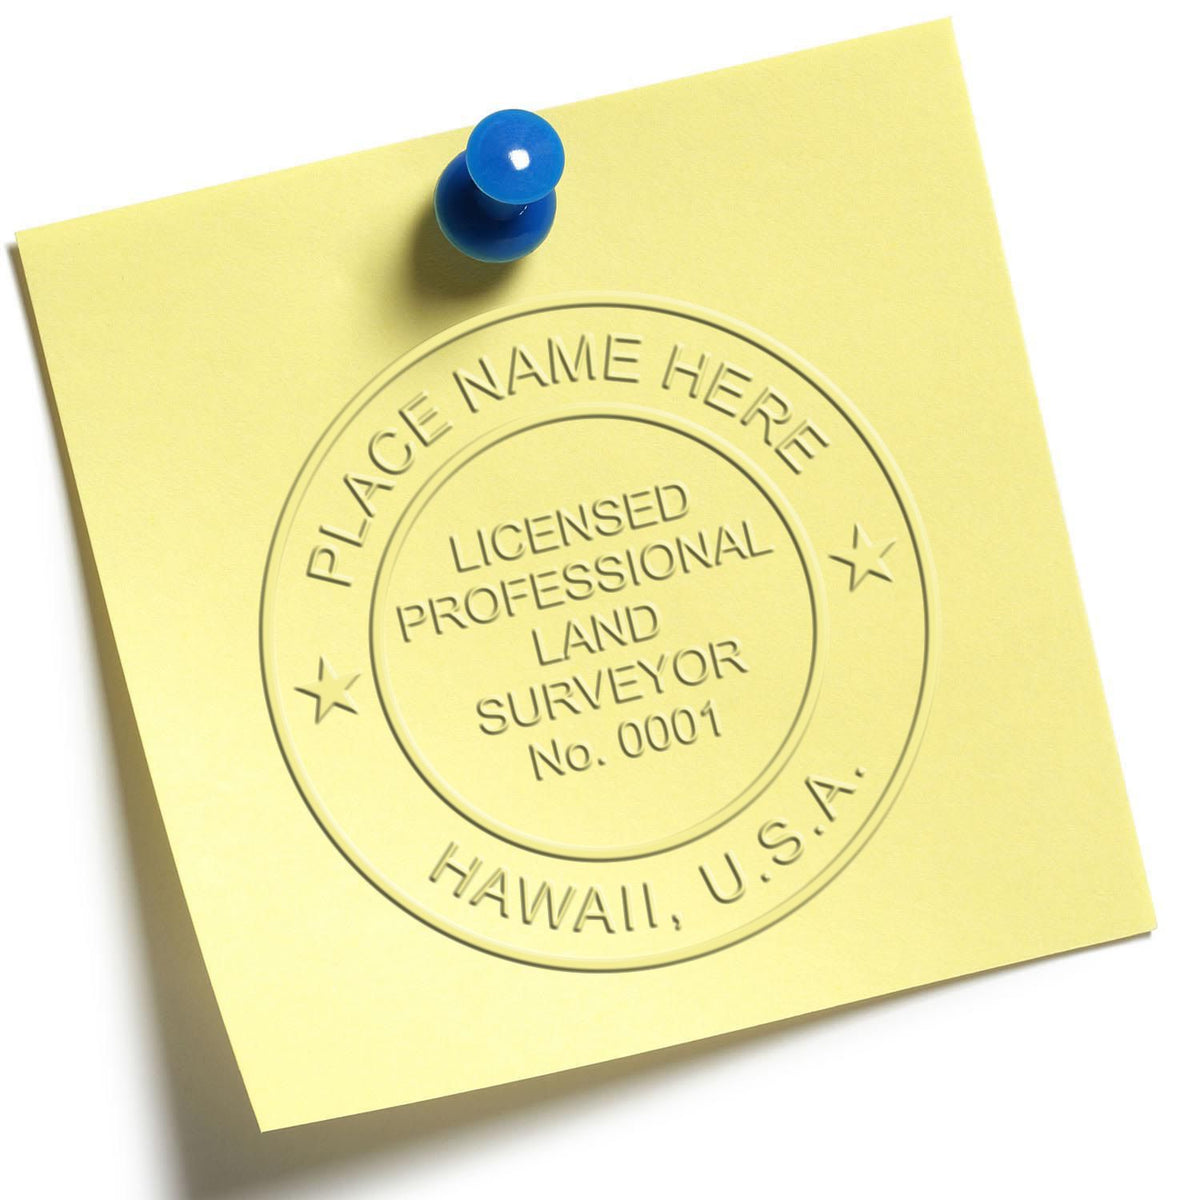 An alternative view of the Hybrid Hawaii Land Surveyor Seal stamped on a sheet of paper showing the image in use